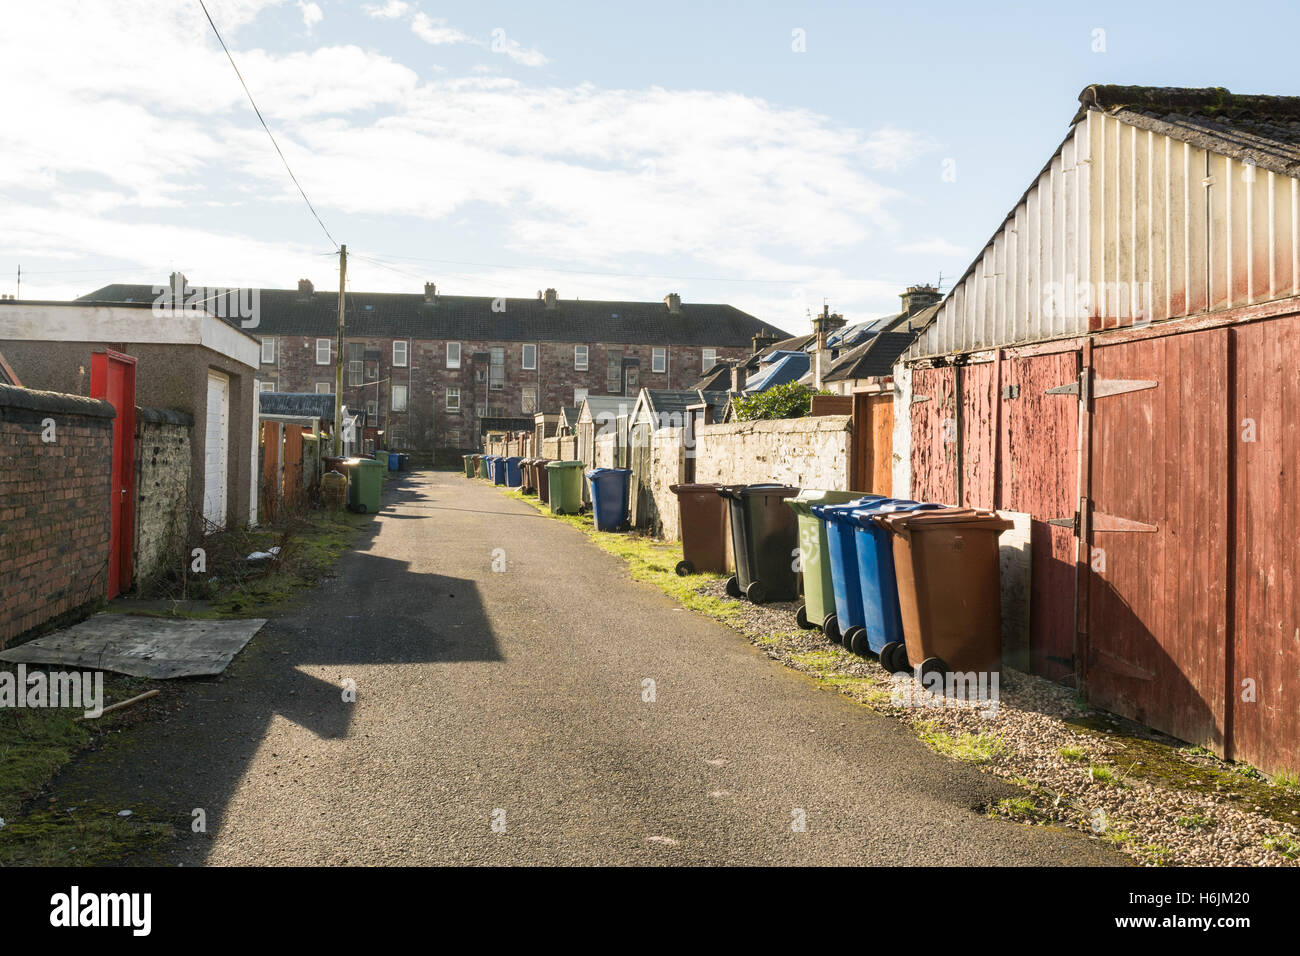 Alleyway with garages and dustbins in Dumbarton, Scotland, UK Stock Photo